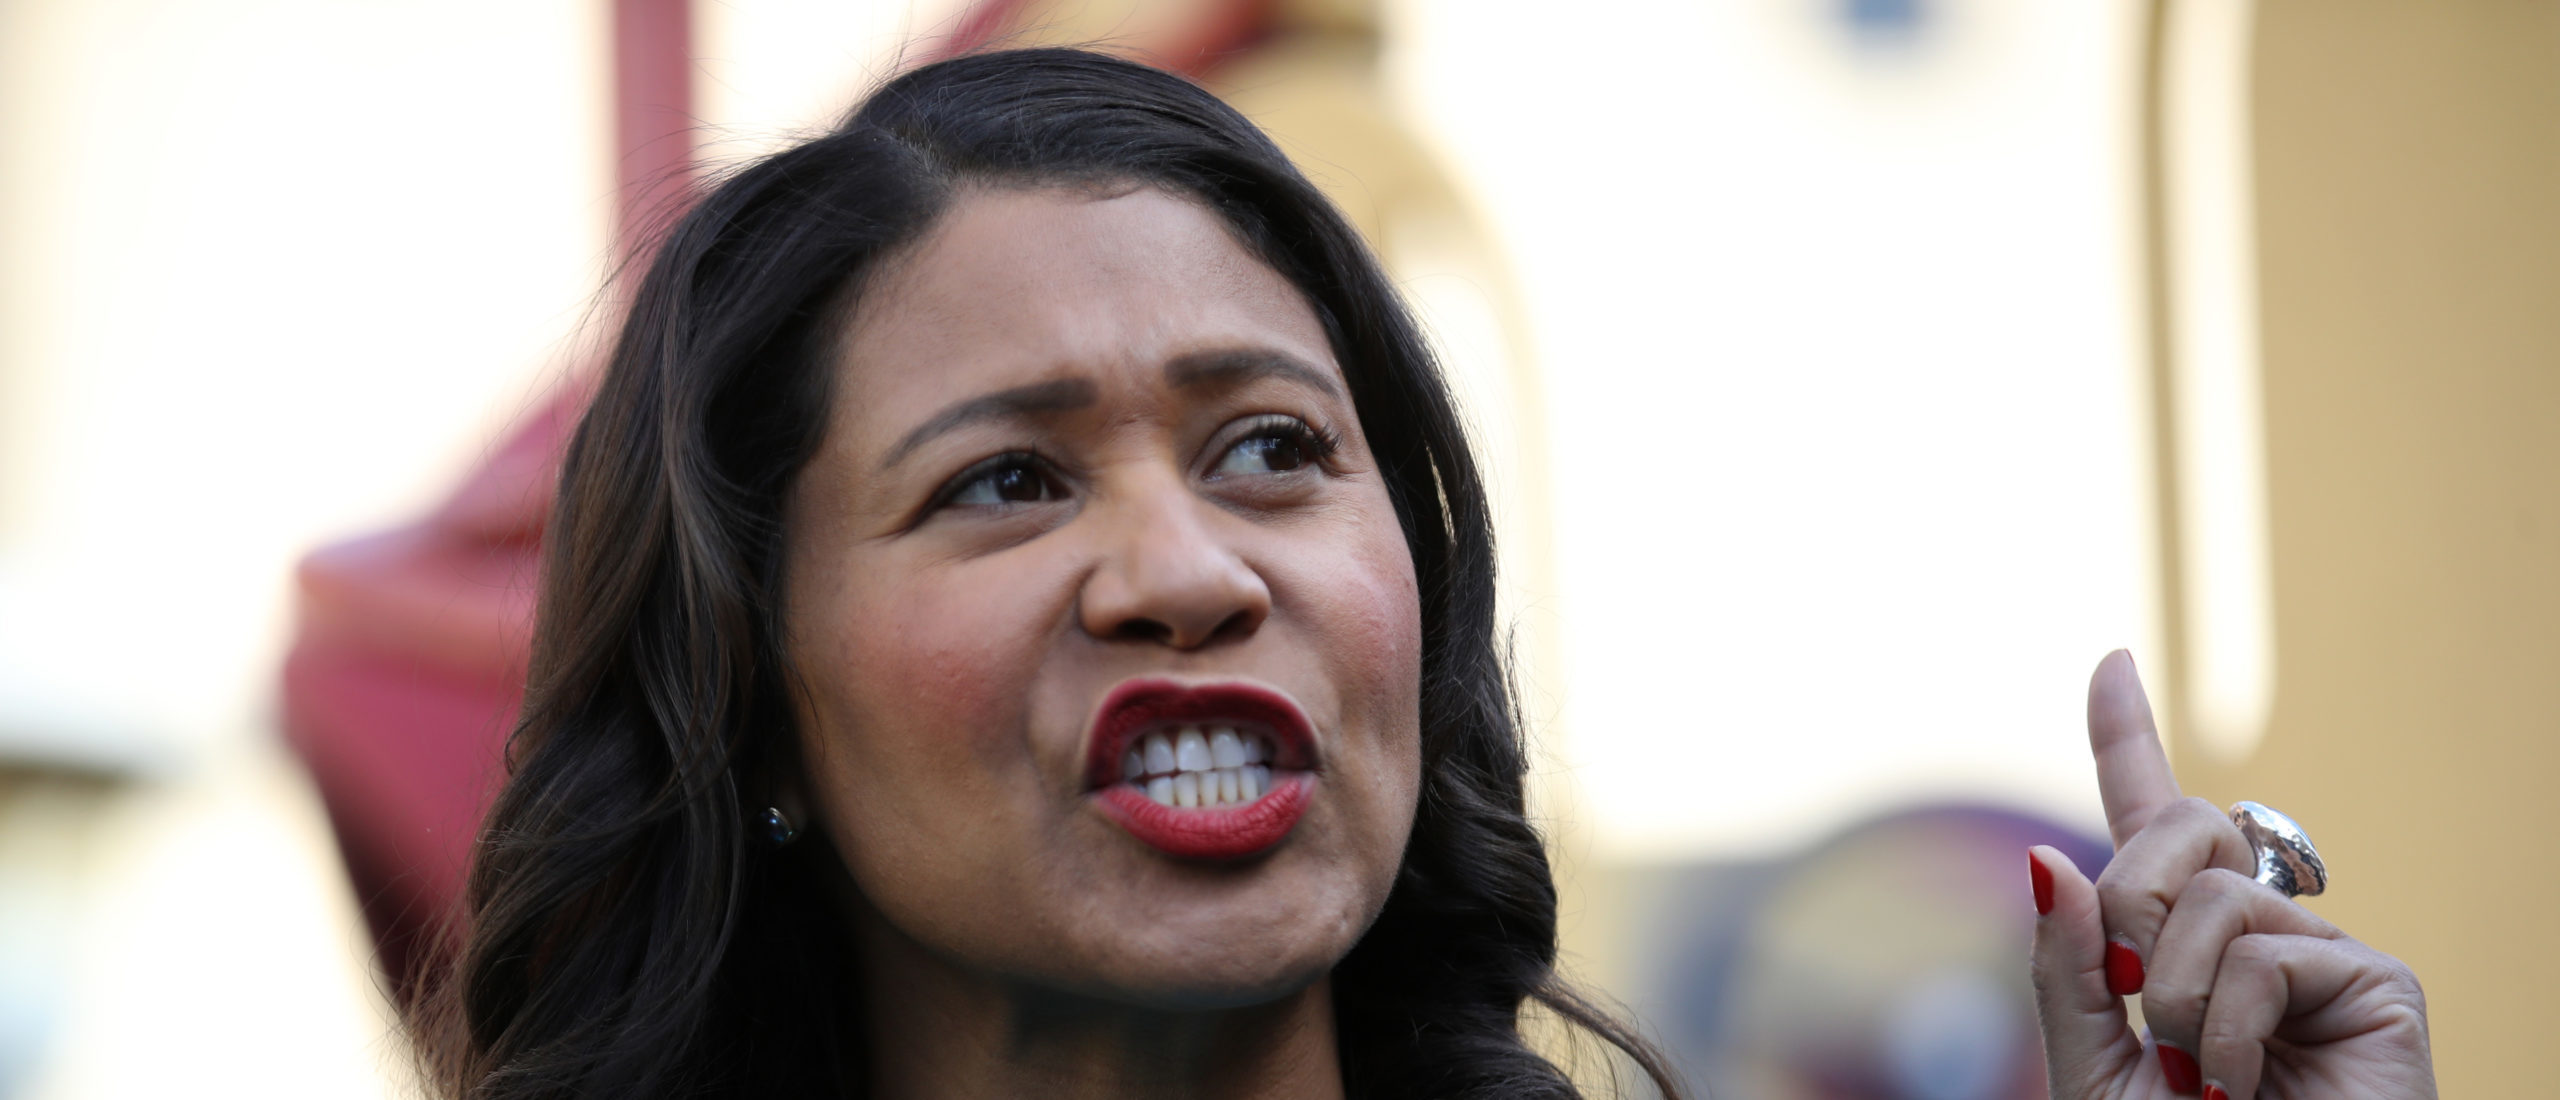 San Francisco mayor London Breed speaks during a press conference at Hamilton Families on November 21, 2019 in San Francisco, California. (Photo by Justin Sullivan/Getty Images)